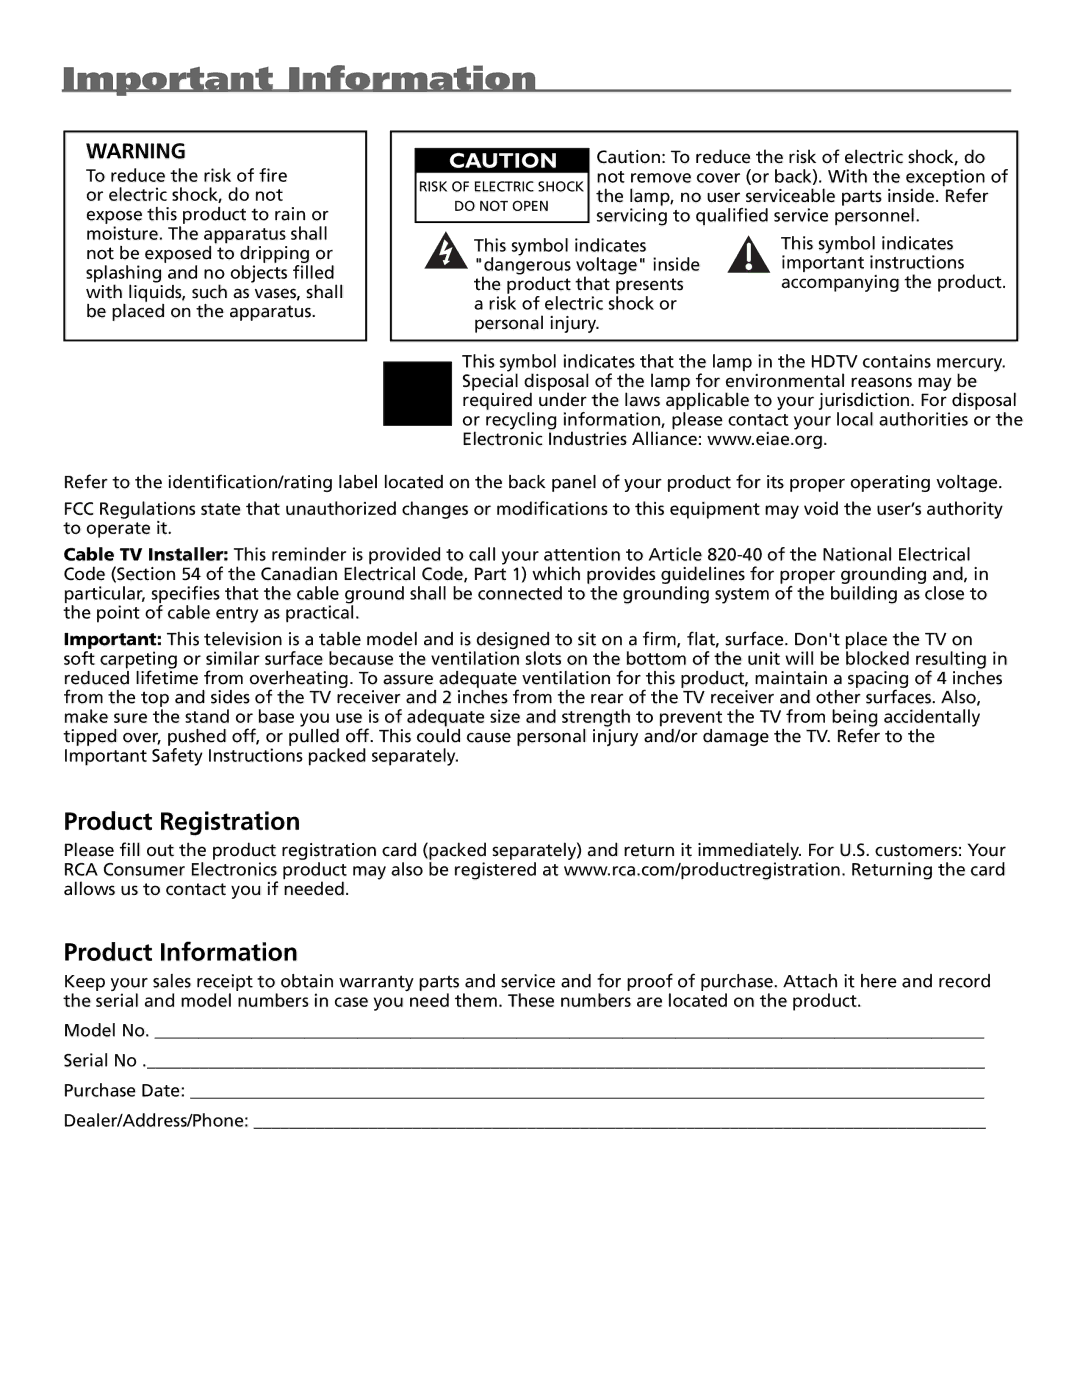 RCA HDTV manual Important Information, Product Registration Product Information 